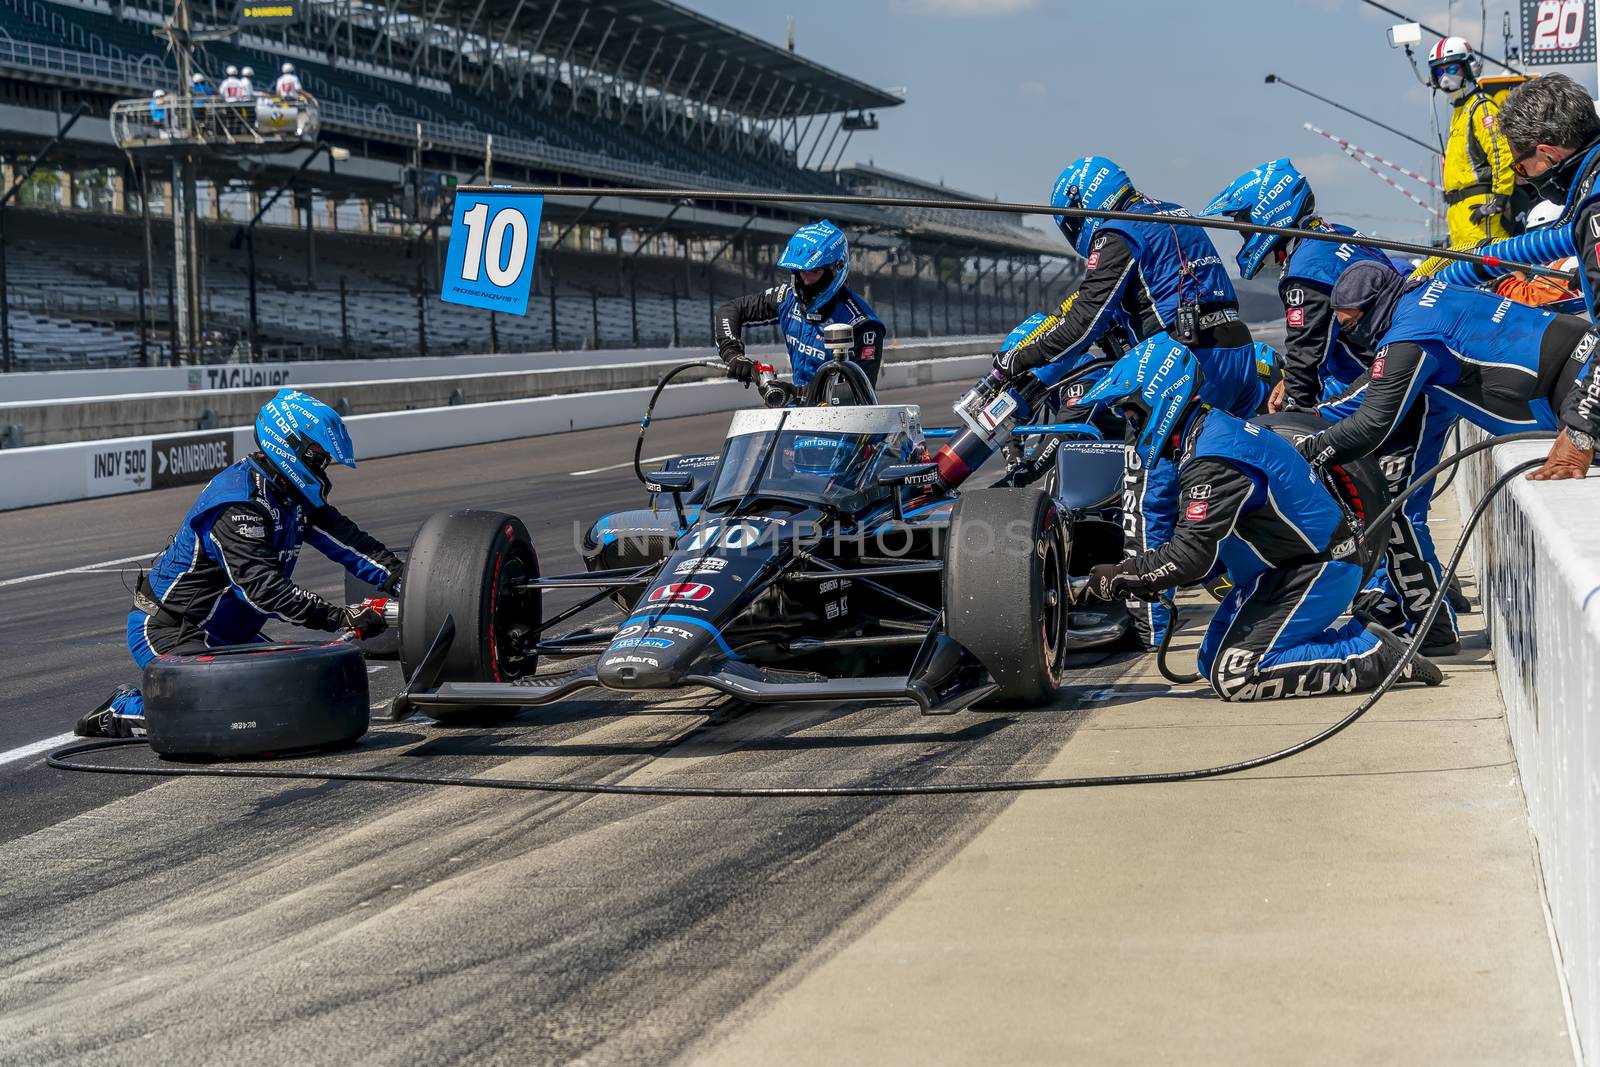 FELIX ROSENQVIST (10) of Varnamo, Sweden brings his car in for service during the Indianapolis 500 at Indianapolis Motor Speedway in Indianapolis Indiana.